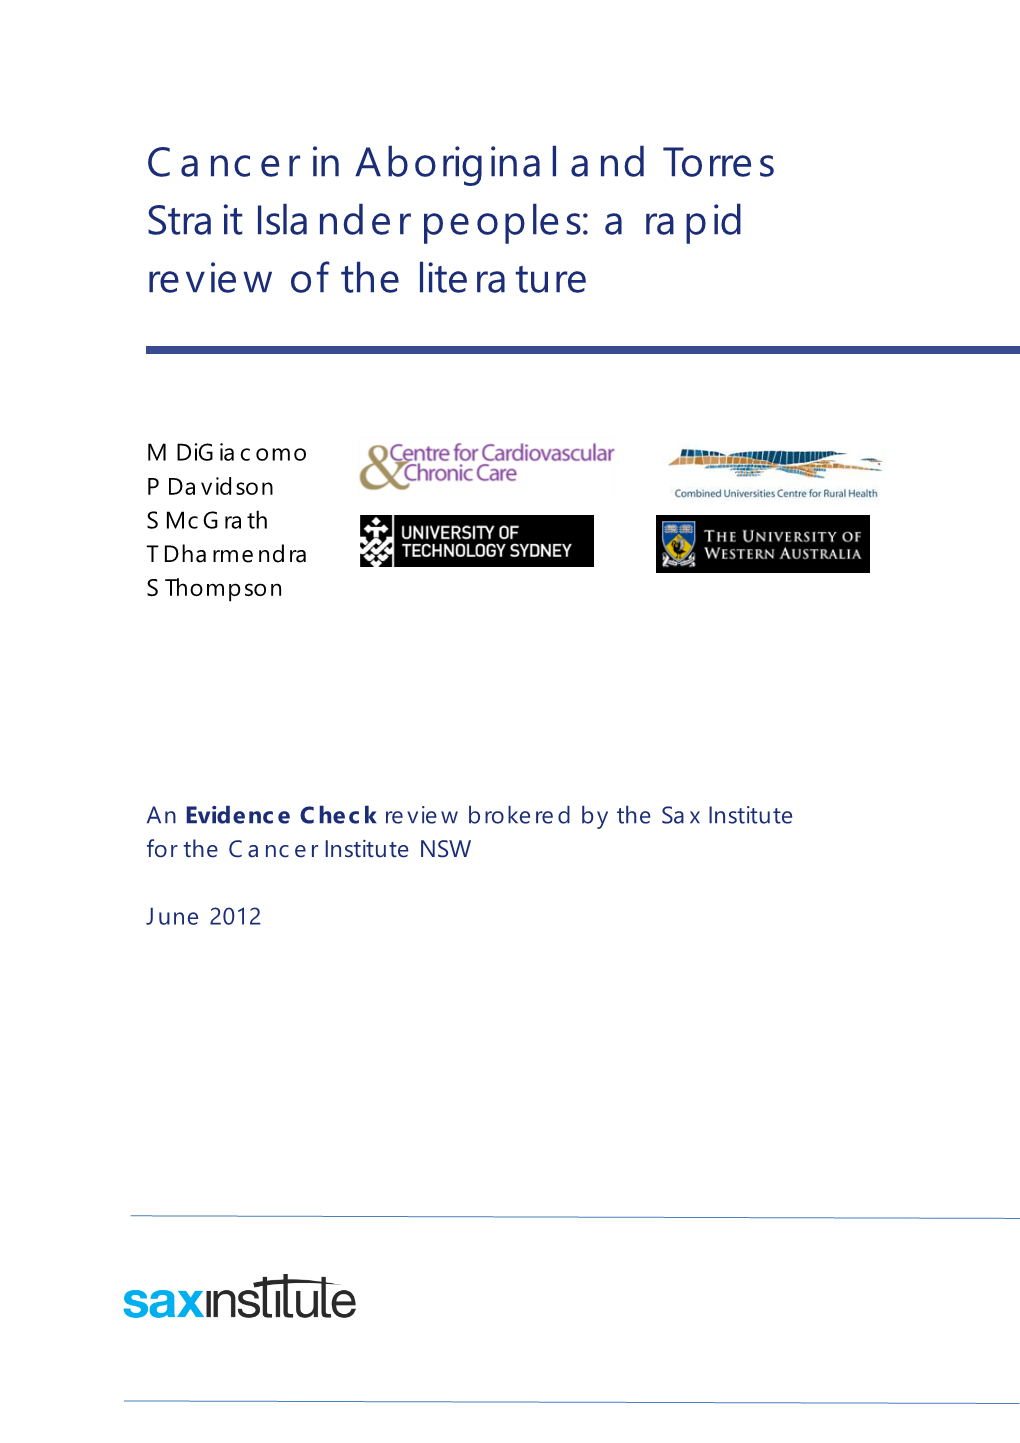 Cancer in Aboriginal and Torres Strait Islander Peoples: a Rapid Review of the Literature